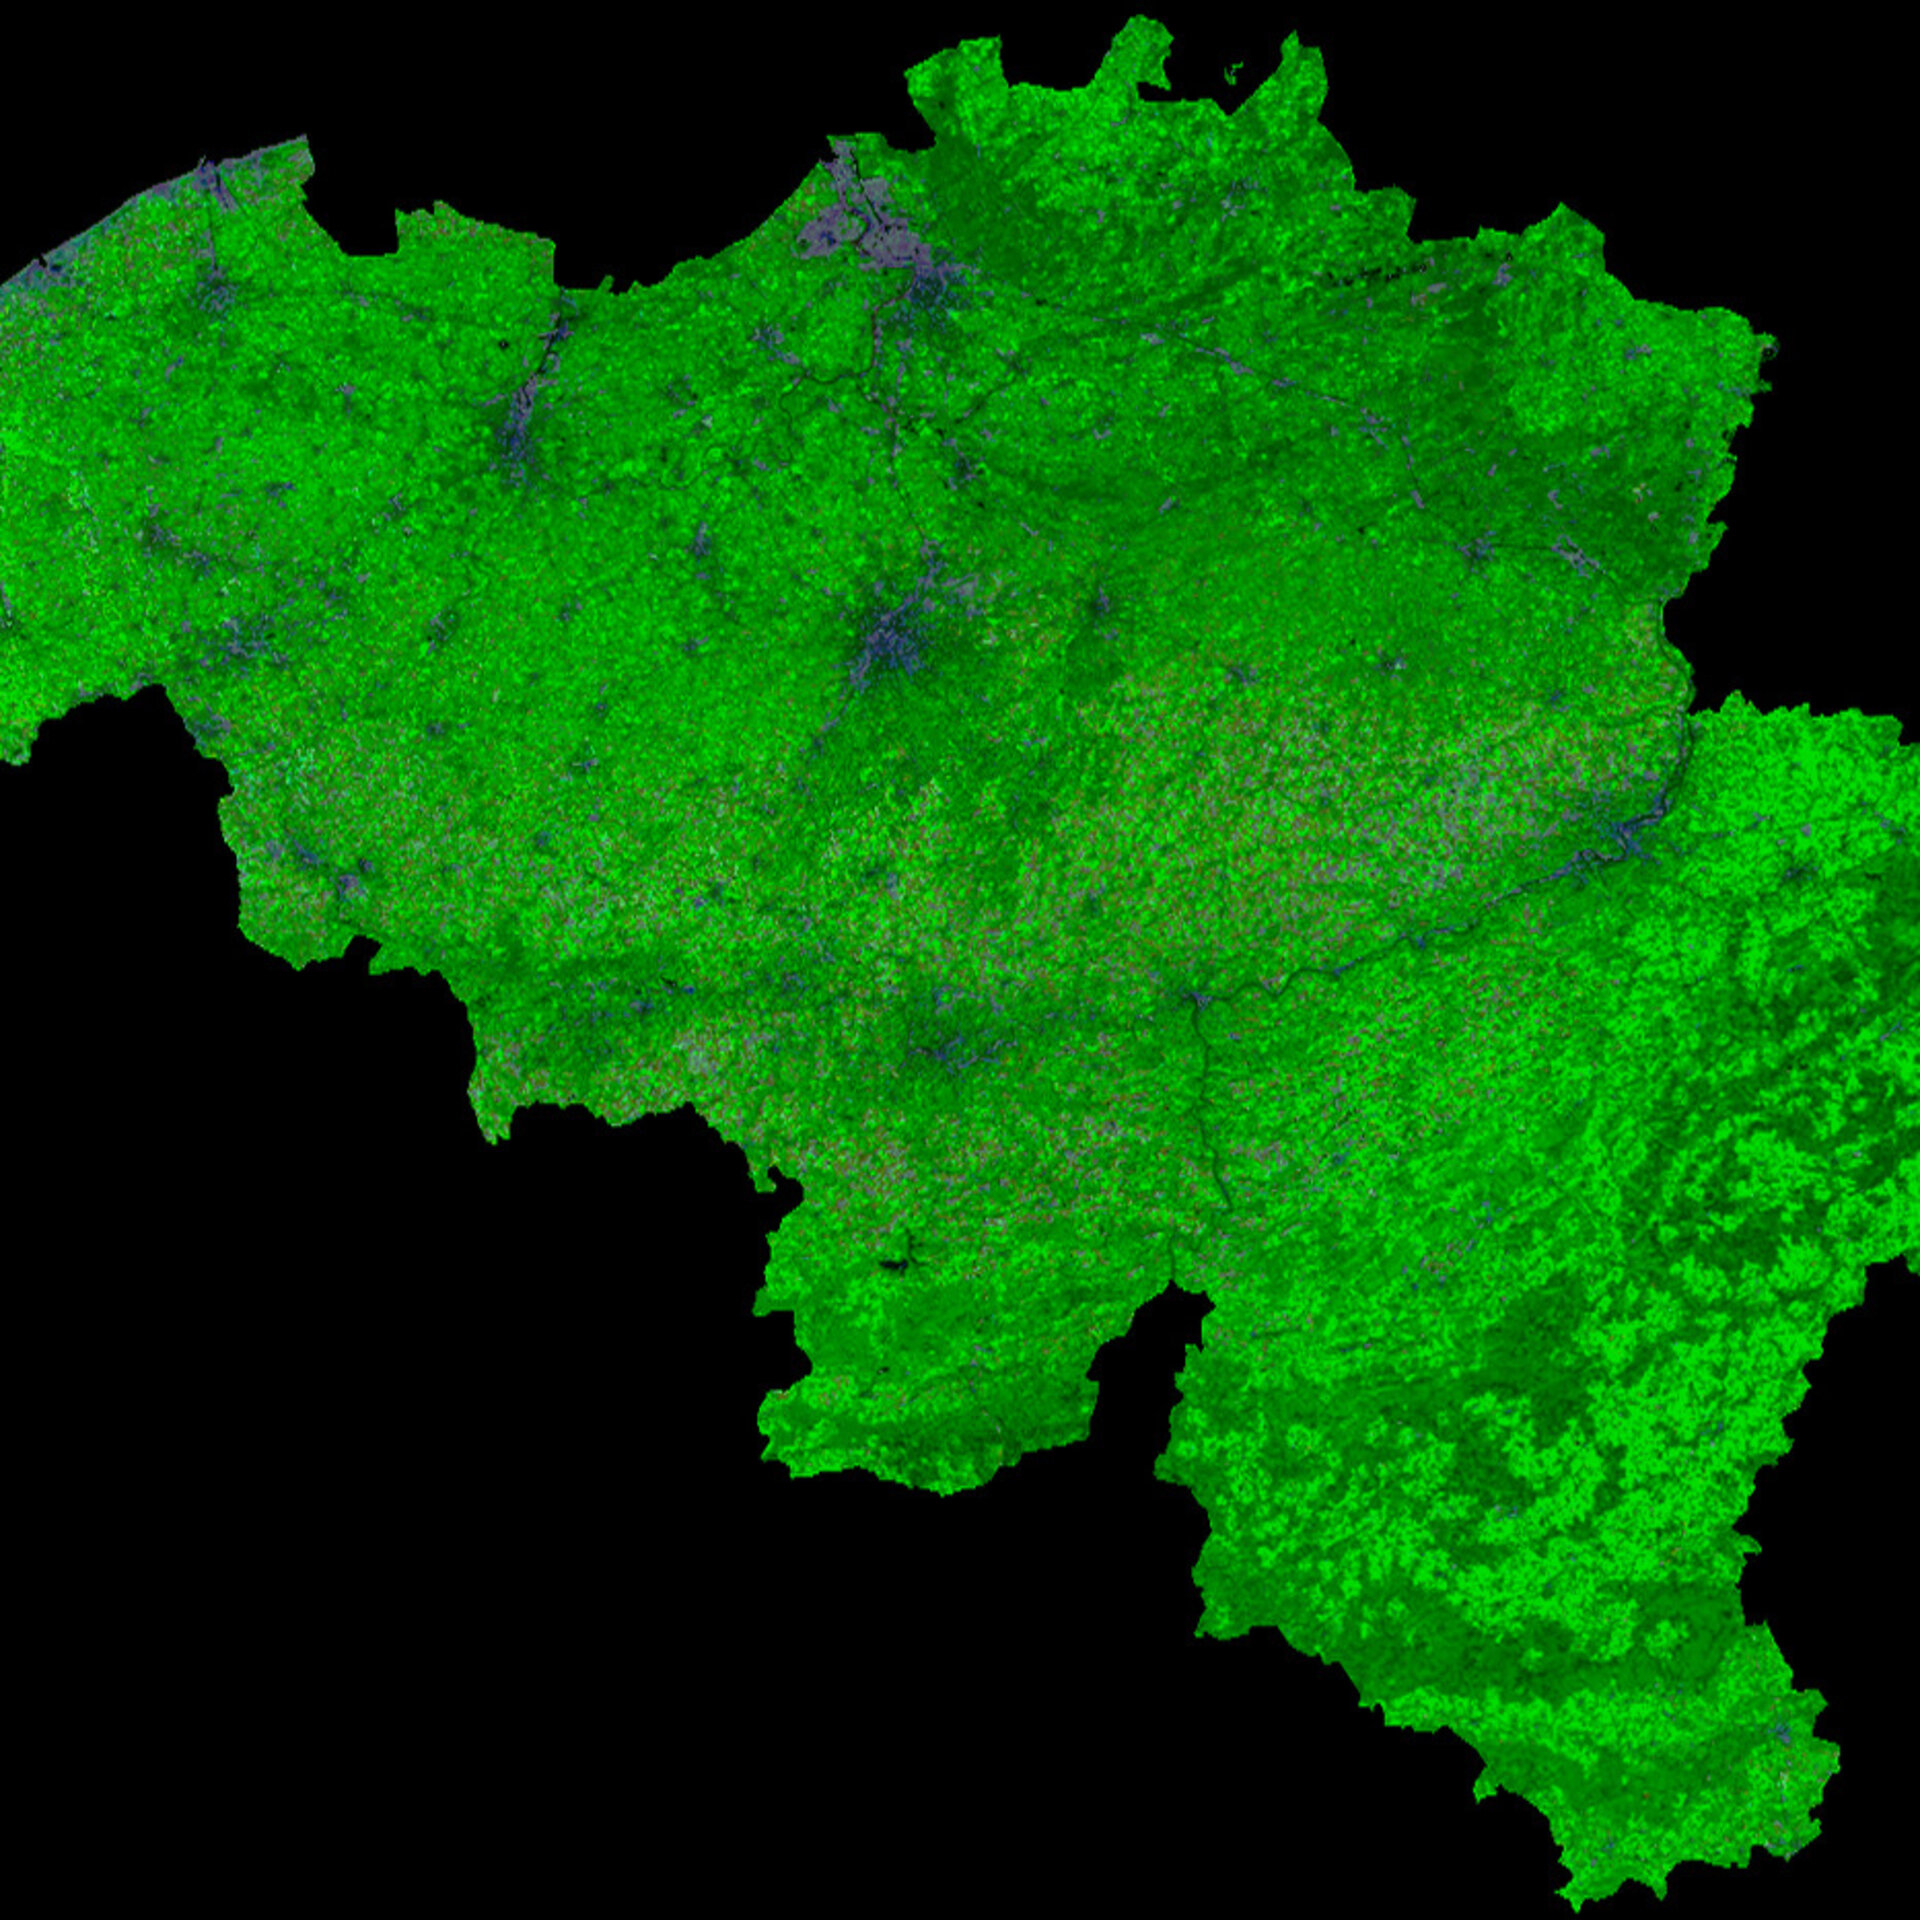 A cloud-free image of Belgium, acquired by ESA's Proba-V satellite